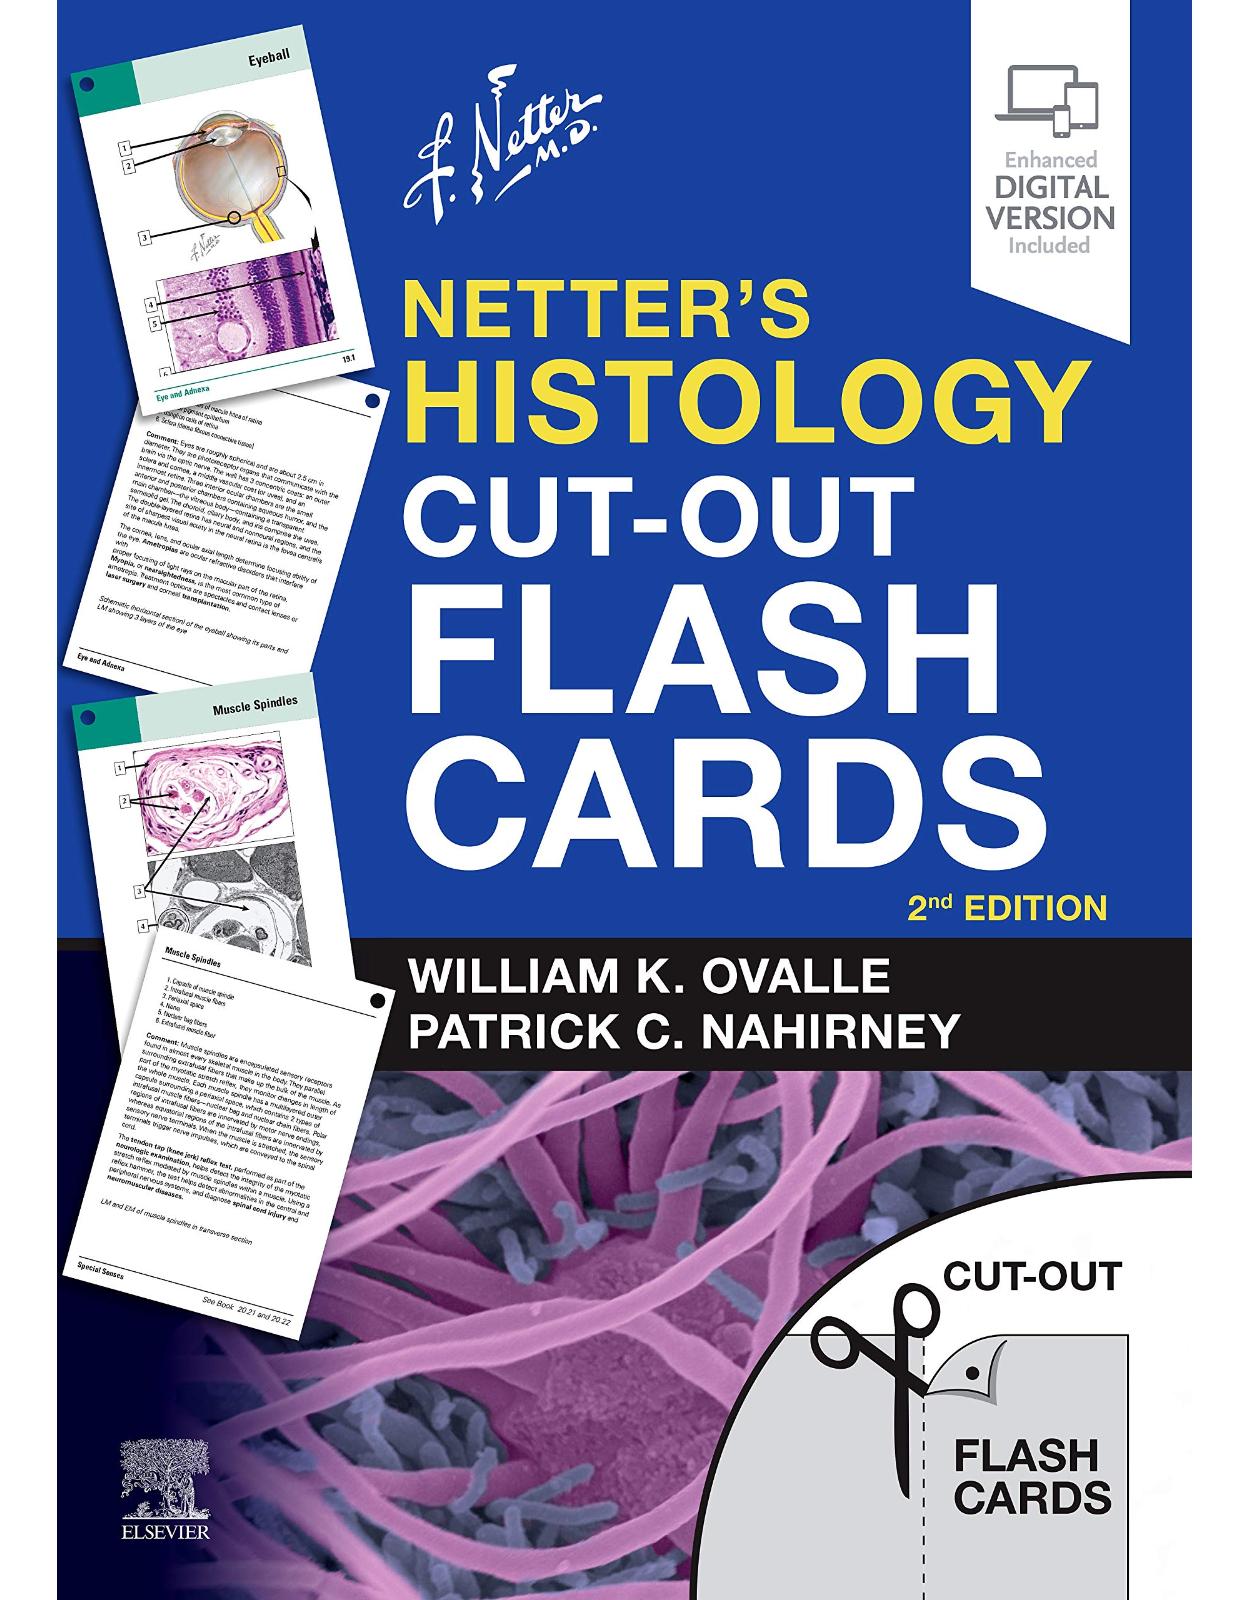 Netter’s Histology Cut-Out Flash Cards: A companion to Netter’s Essential Histology